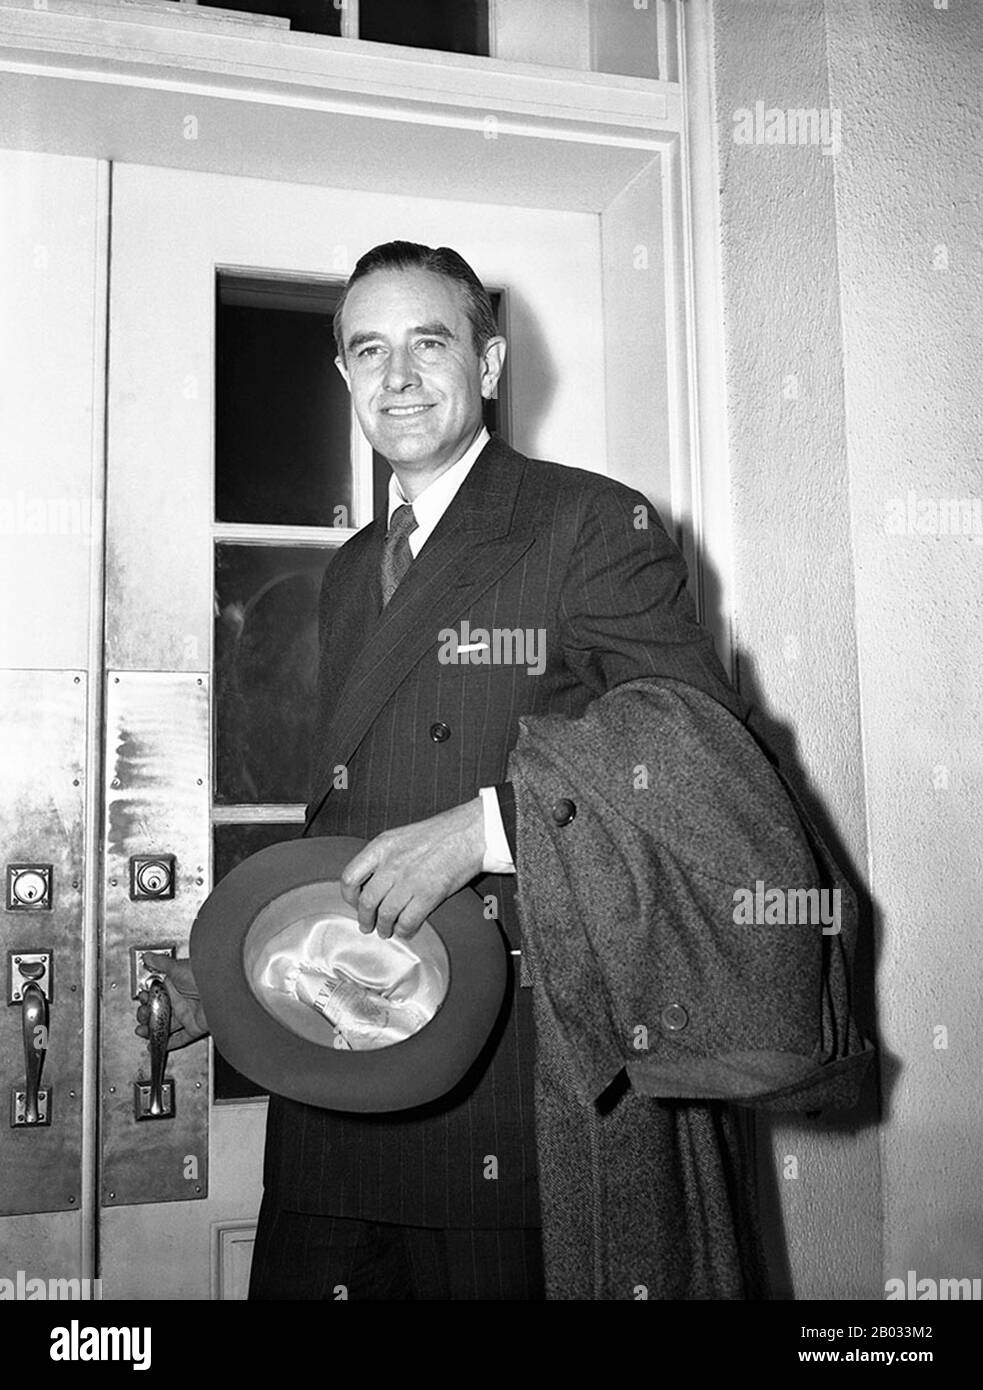 William Averell Harriman (November 15, 1891 – July 26, 1986) was an American Democratic politician, businessman, and diplomat. He was the son of railroad baron E. H. Harriman. He served as Secretary of Commerce under President Harry S. Truman and later as the 48th Governor of New York. He was a candidate for the Democratic presidential nomination in 1952, and again in 1956 when he was endorsed by President Truman but lost to Adlai Stevenson both times.  Harriman served President Franklin D. Roosevelt as special envoy to Europe and served as the U.S. Ambassador to the Soviet Union and U.S. Amba Stock Photo